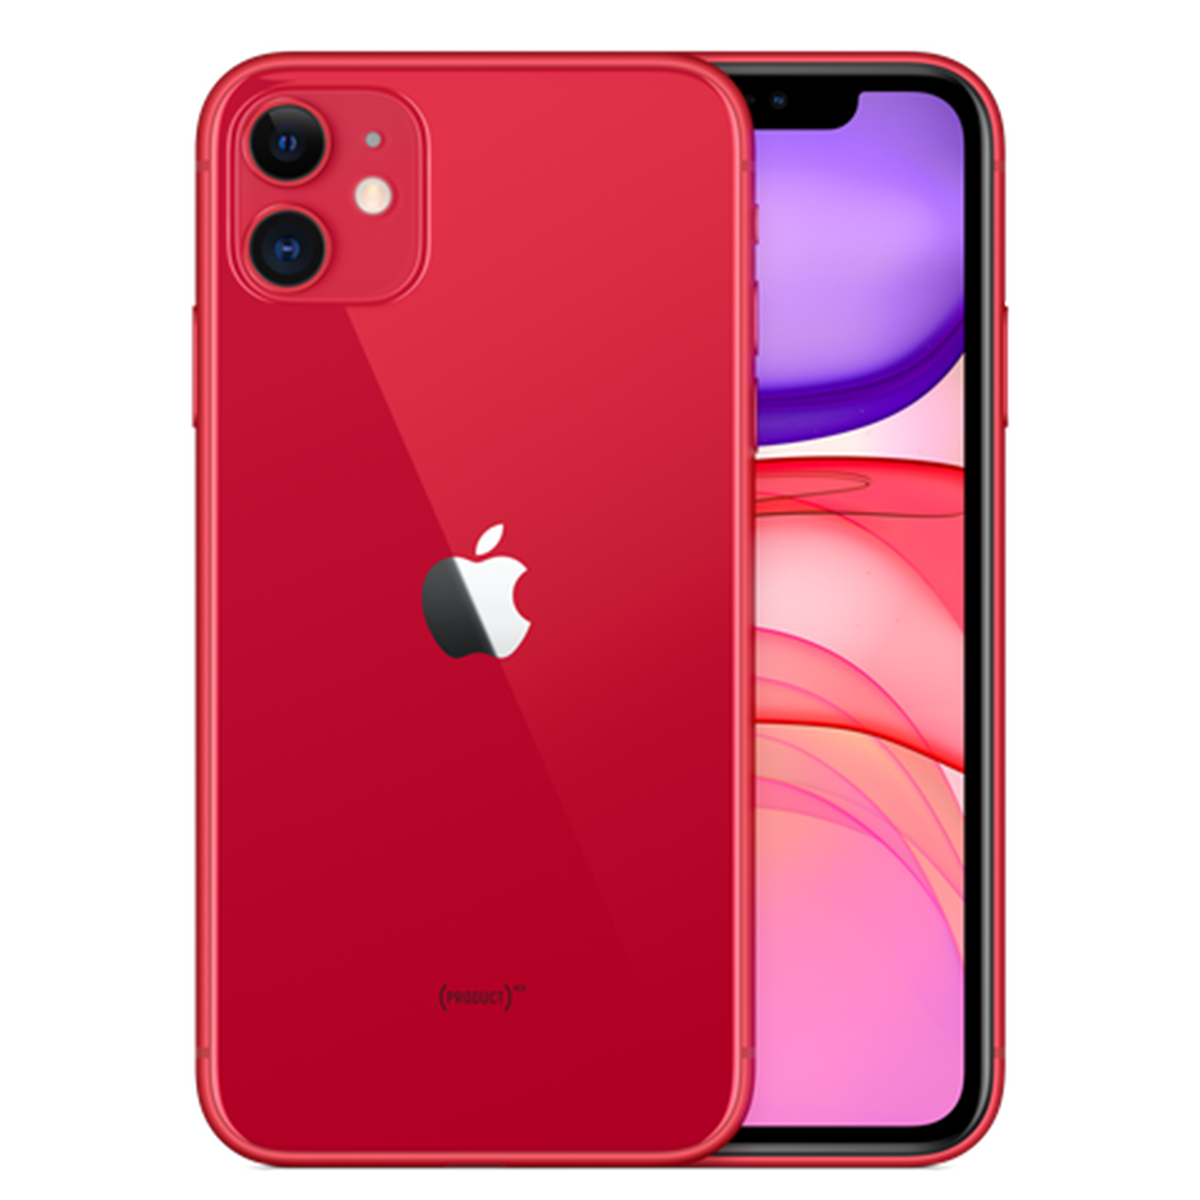 iPhone 11, Red, 128GB (Official Stock)